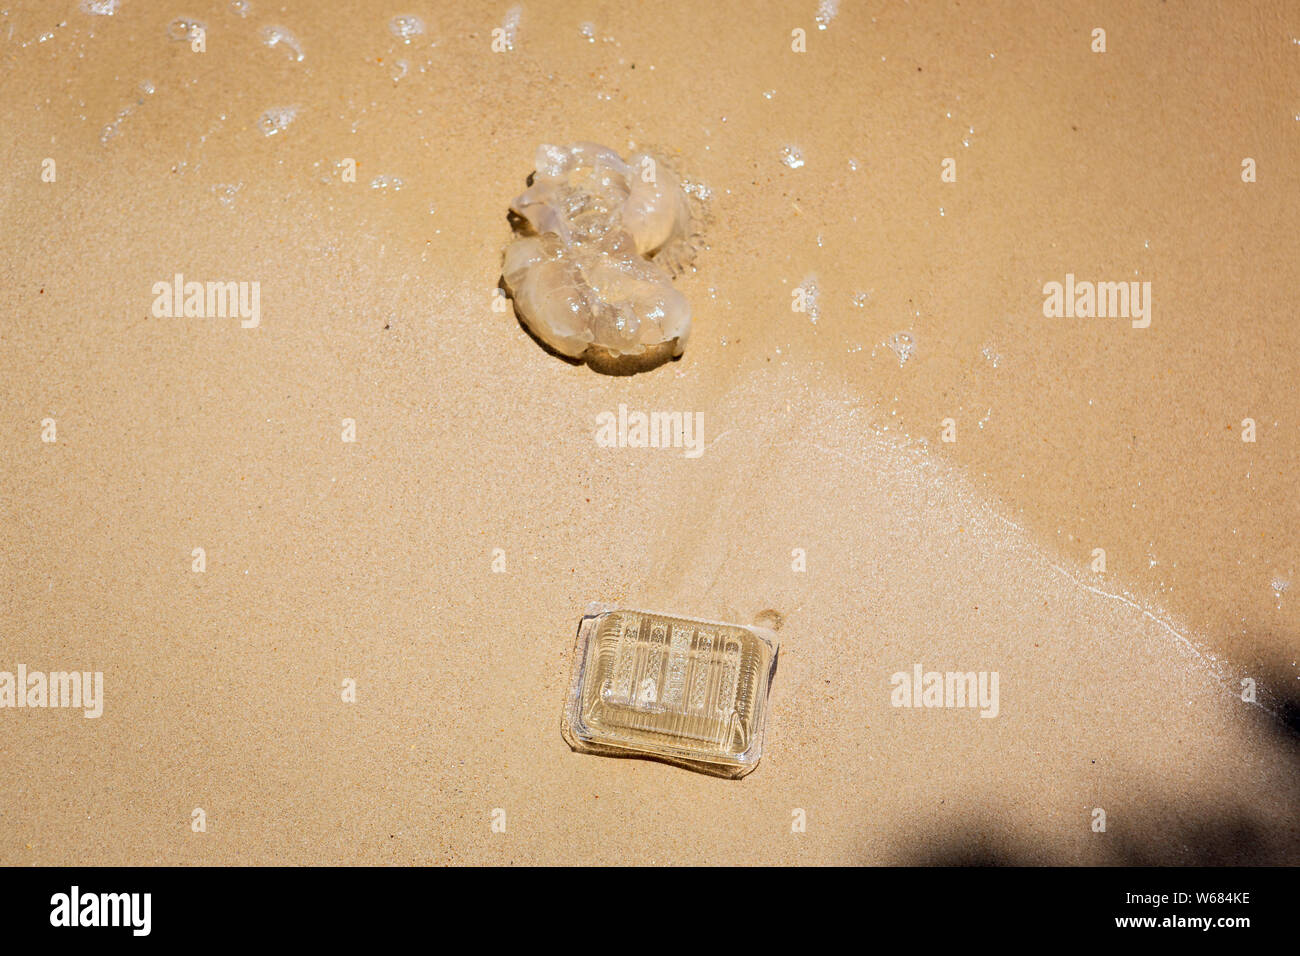 A plastic container and jellyfish washed up at a Thai beach, Krabi, Thailand. Environmental pollution - plastic pollution. Stock Photo